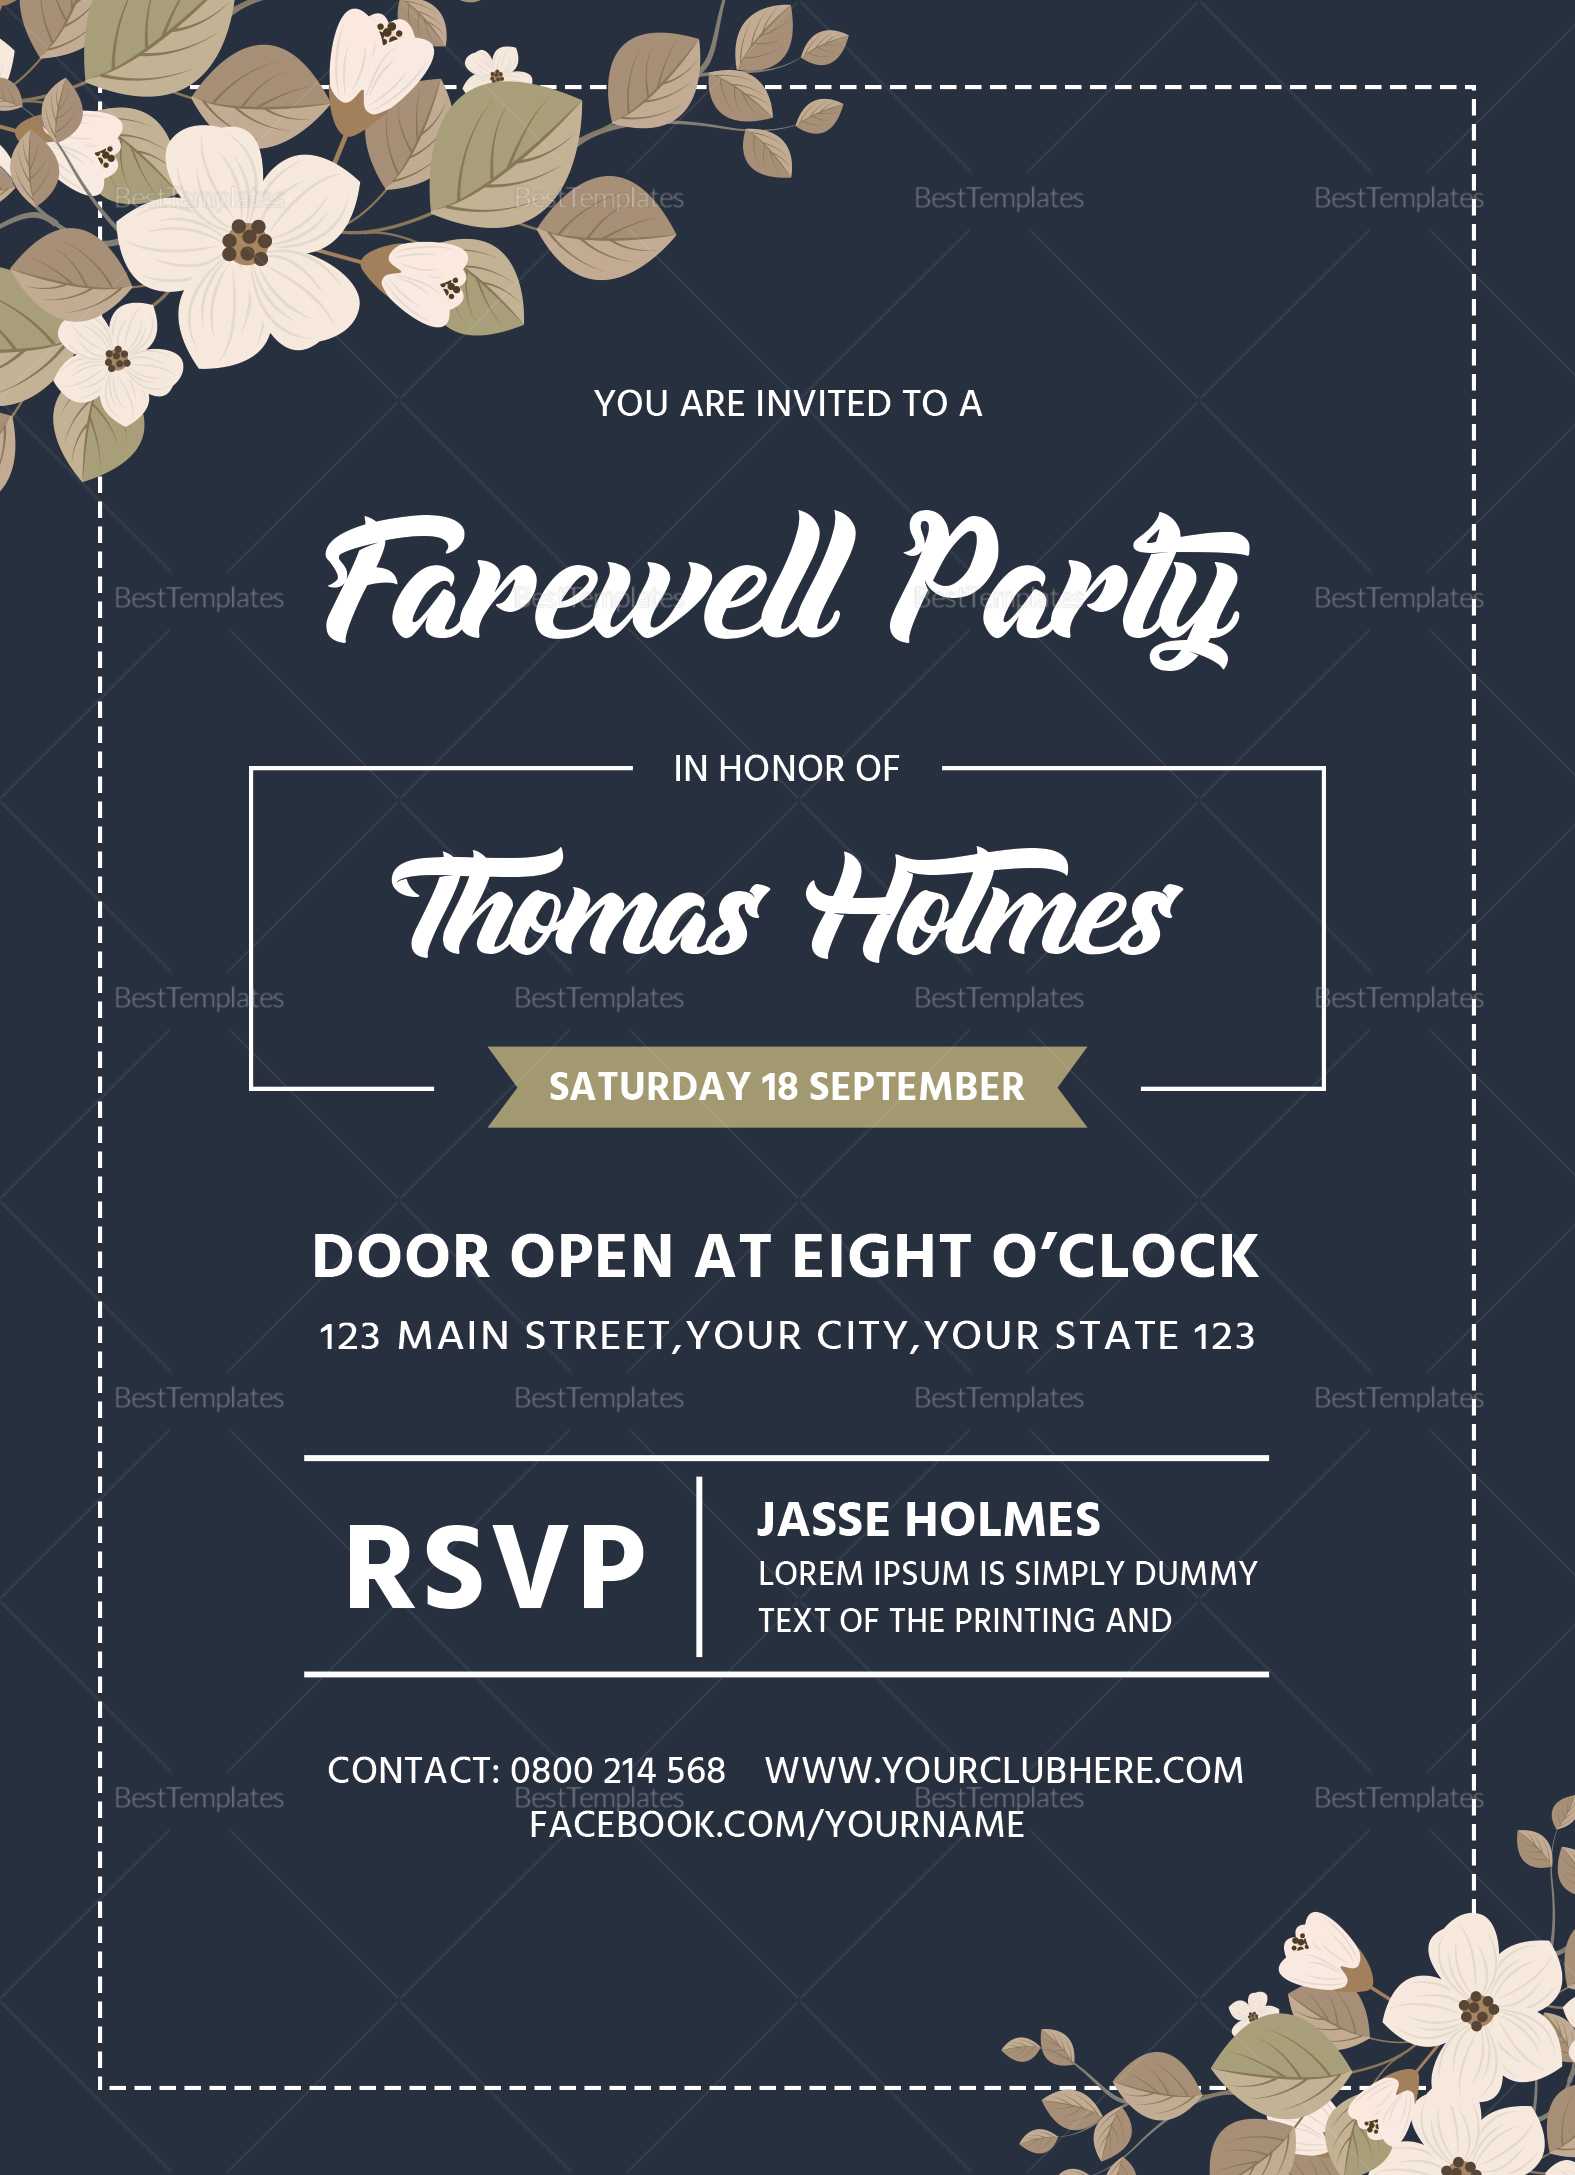 Farewell Party Invitation Card Template For Farewell Invitation Card Template